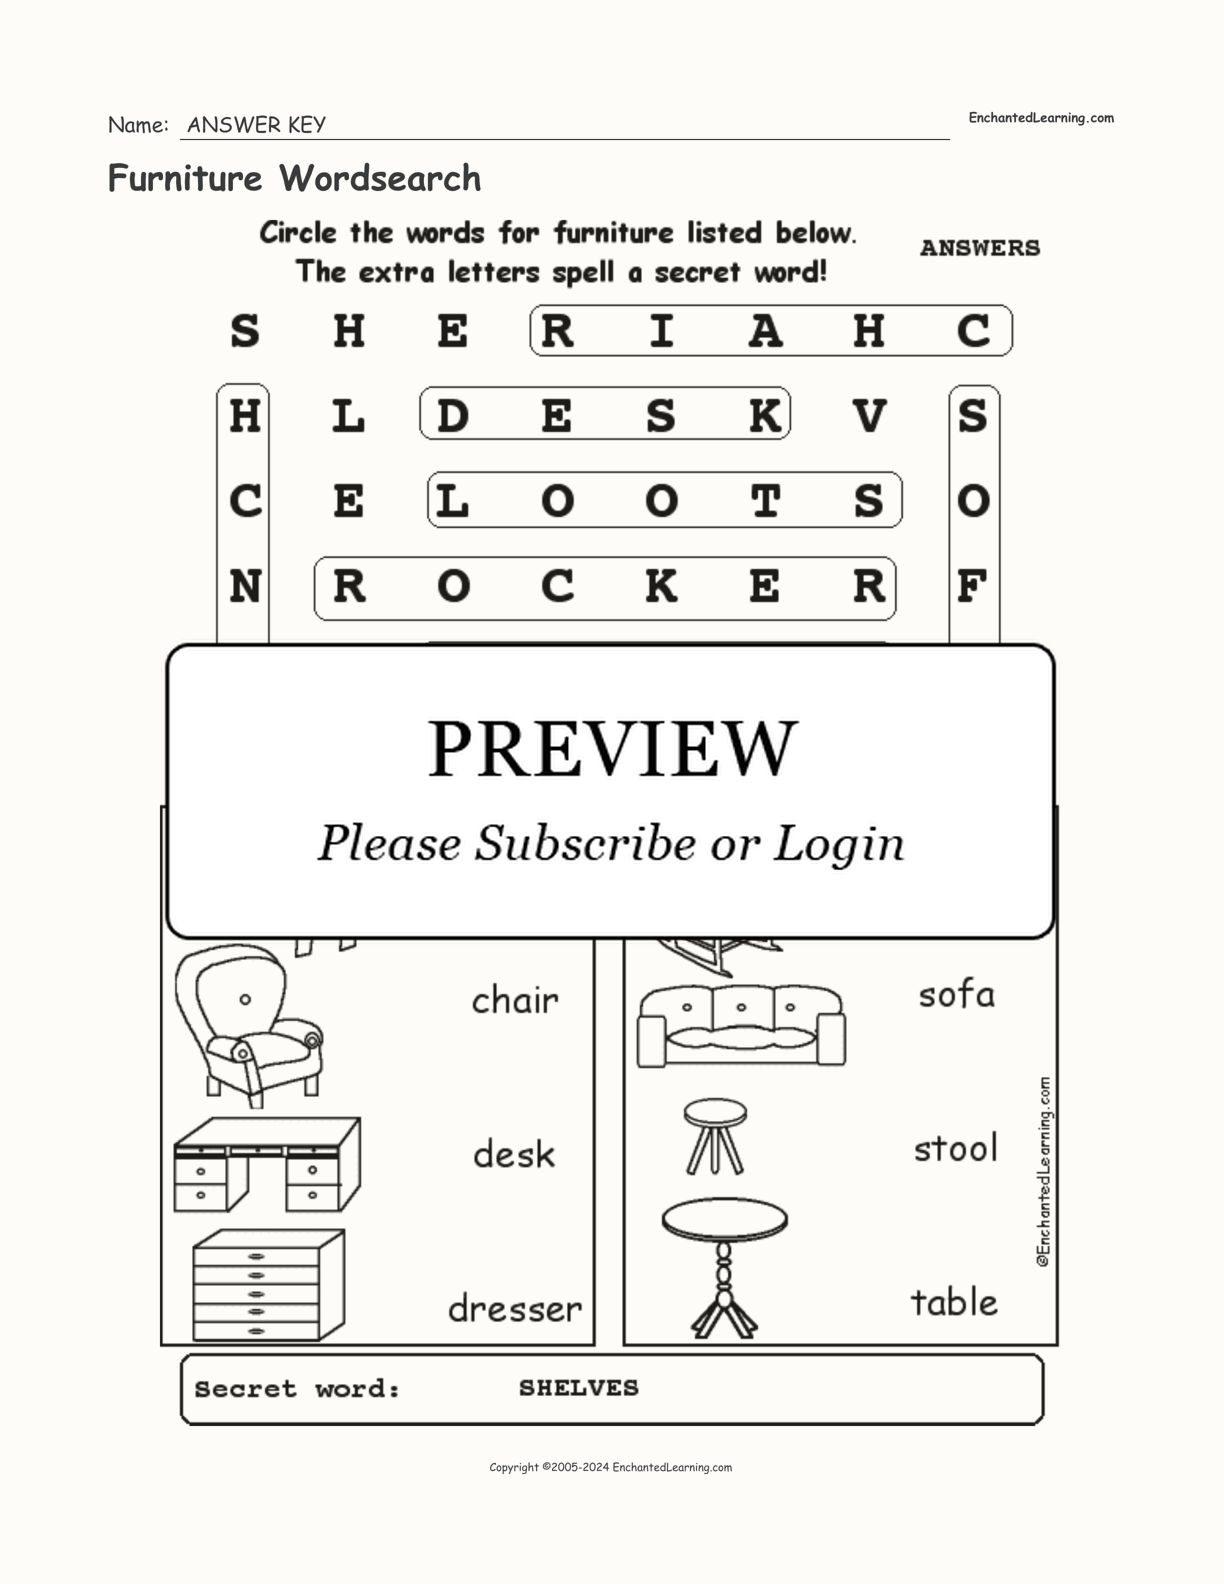 Furniture Wordsearch - Enchanted Learning